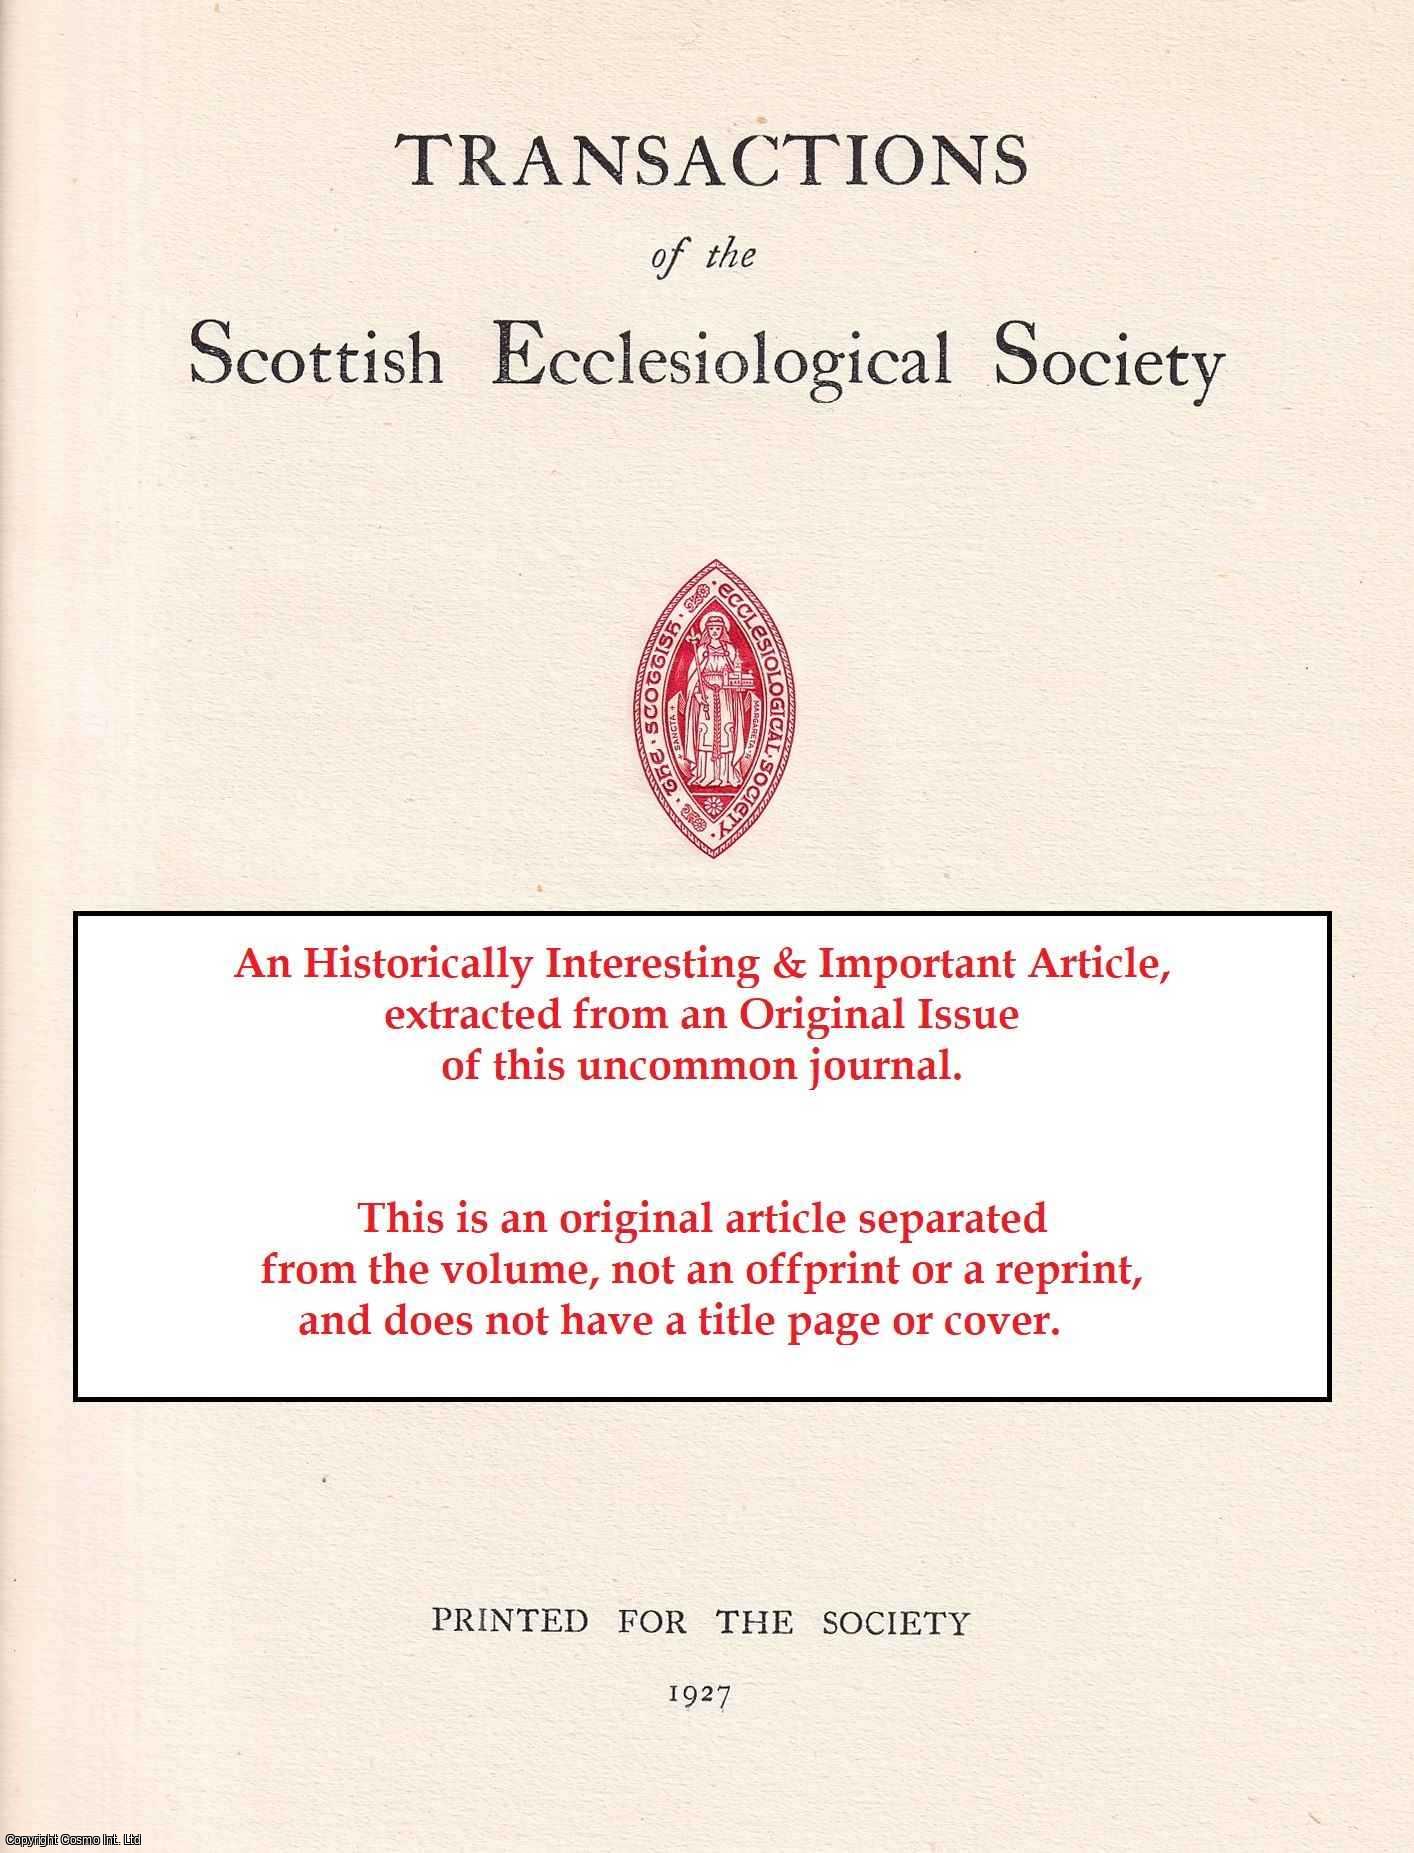 T. Newbigging Adamson - The Litany of Dunkeld. An original article from the Transactions of the Aberdeen Ecclesiological Society, 1890.